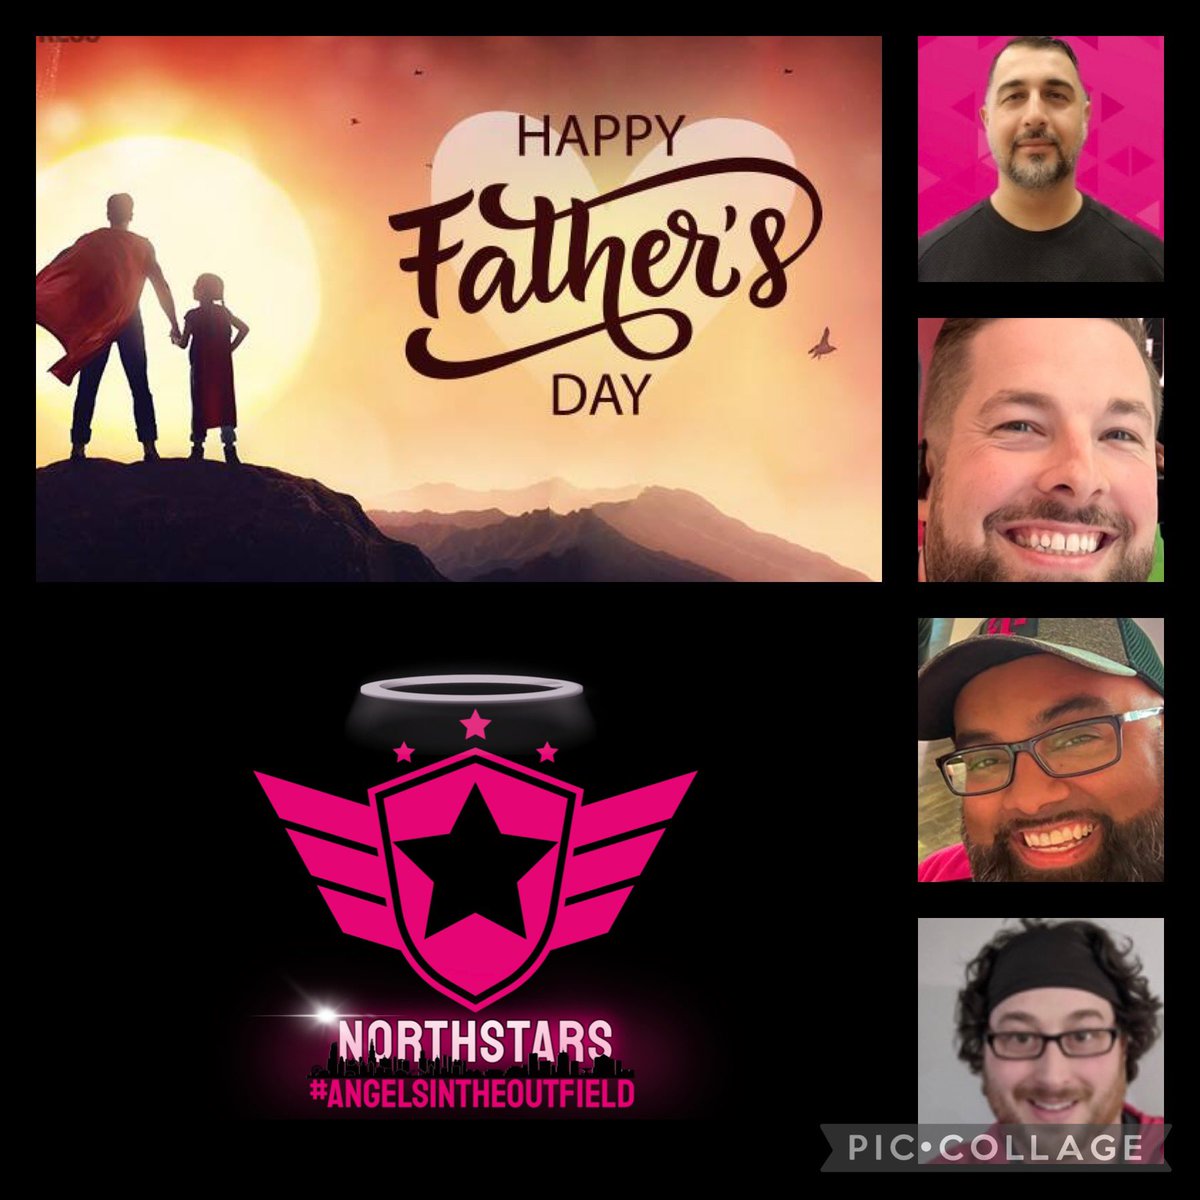 Huge shout out to these Sr. Mgrs that lead teams but also amazing & most rewarding role as a father! Hope you get to enjoy with your family and kids 🎉🤩😍